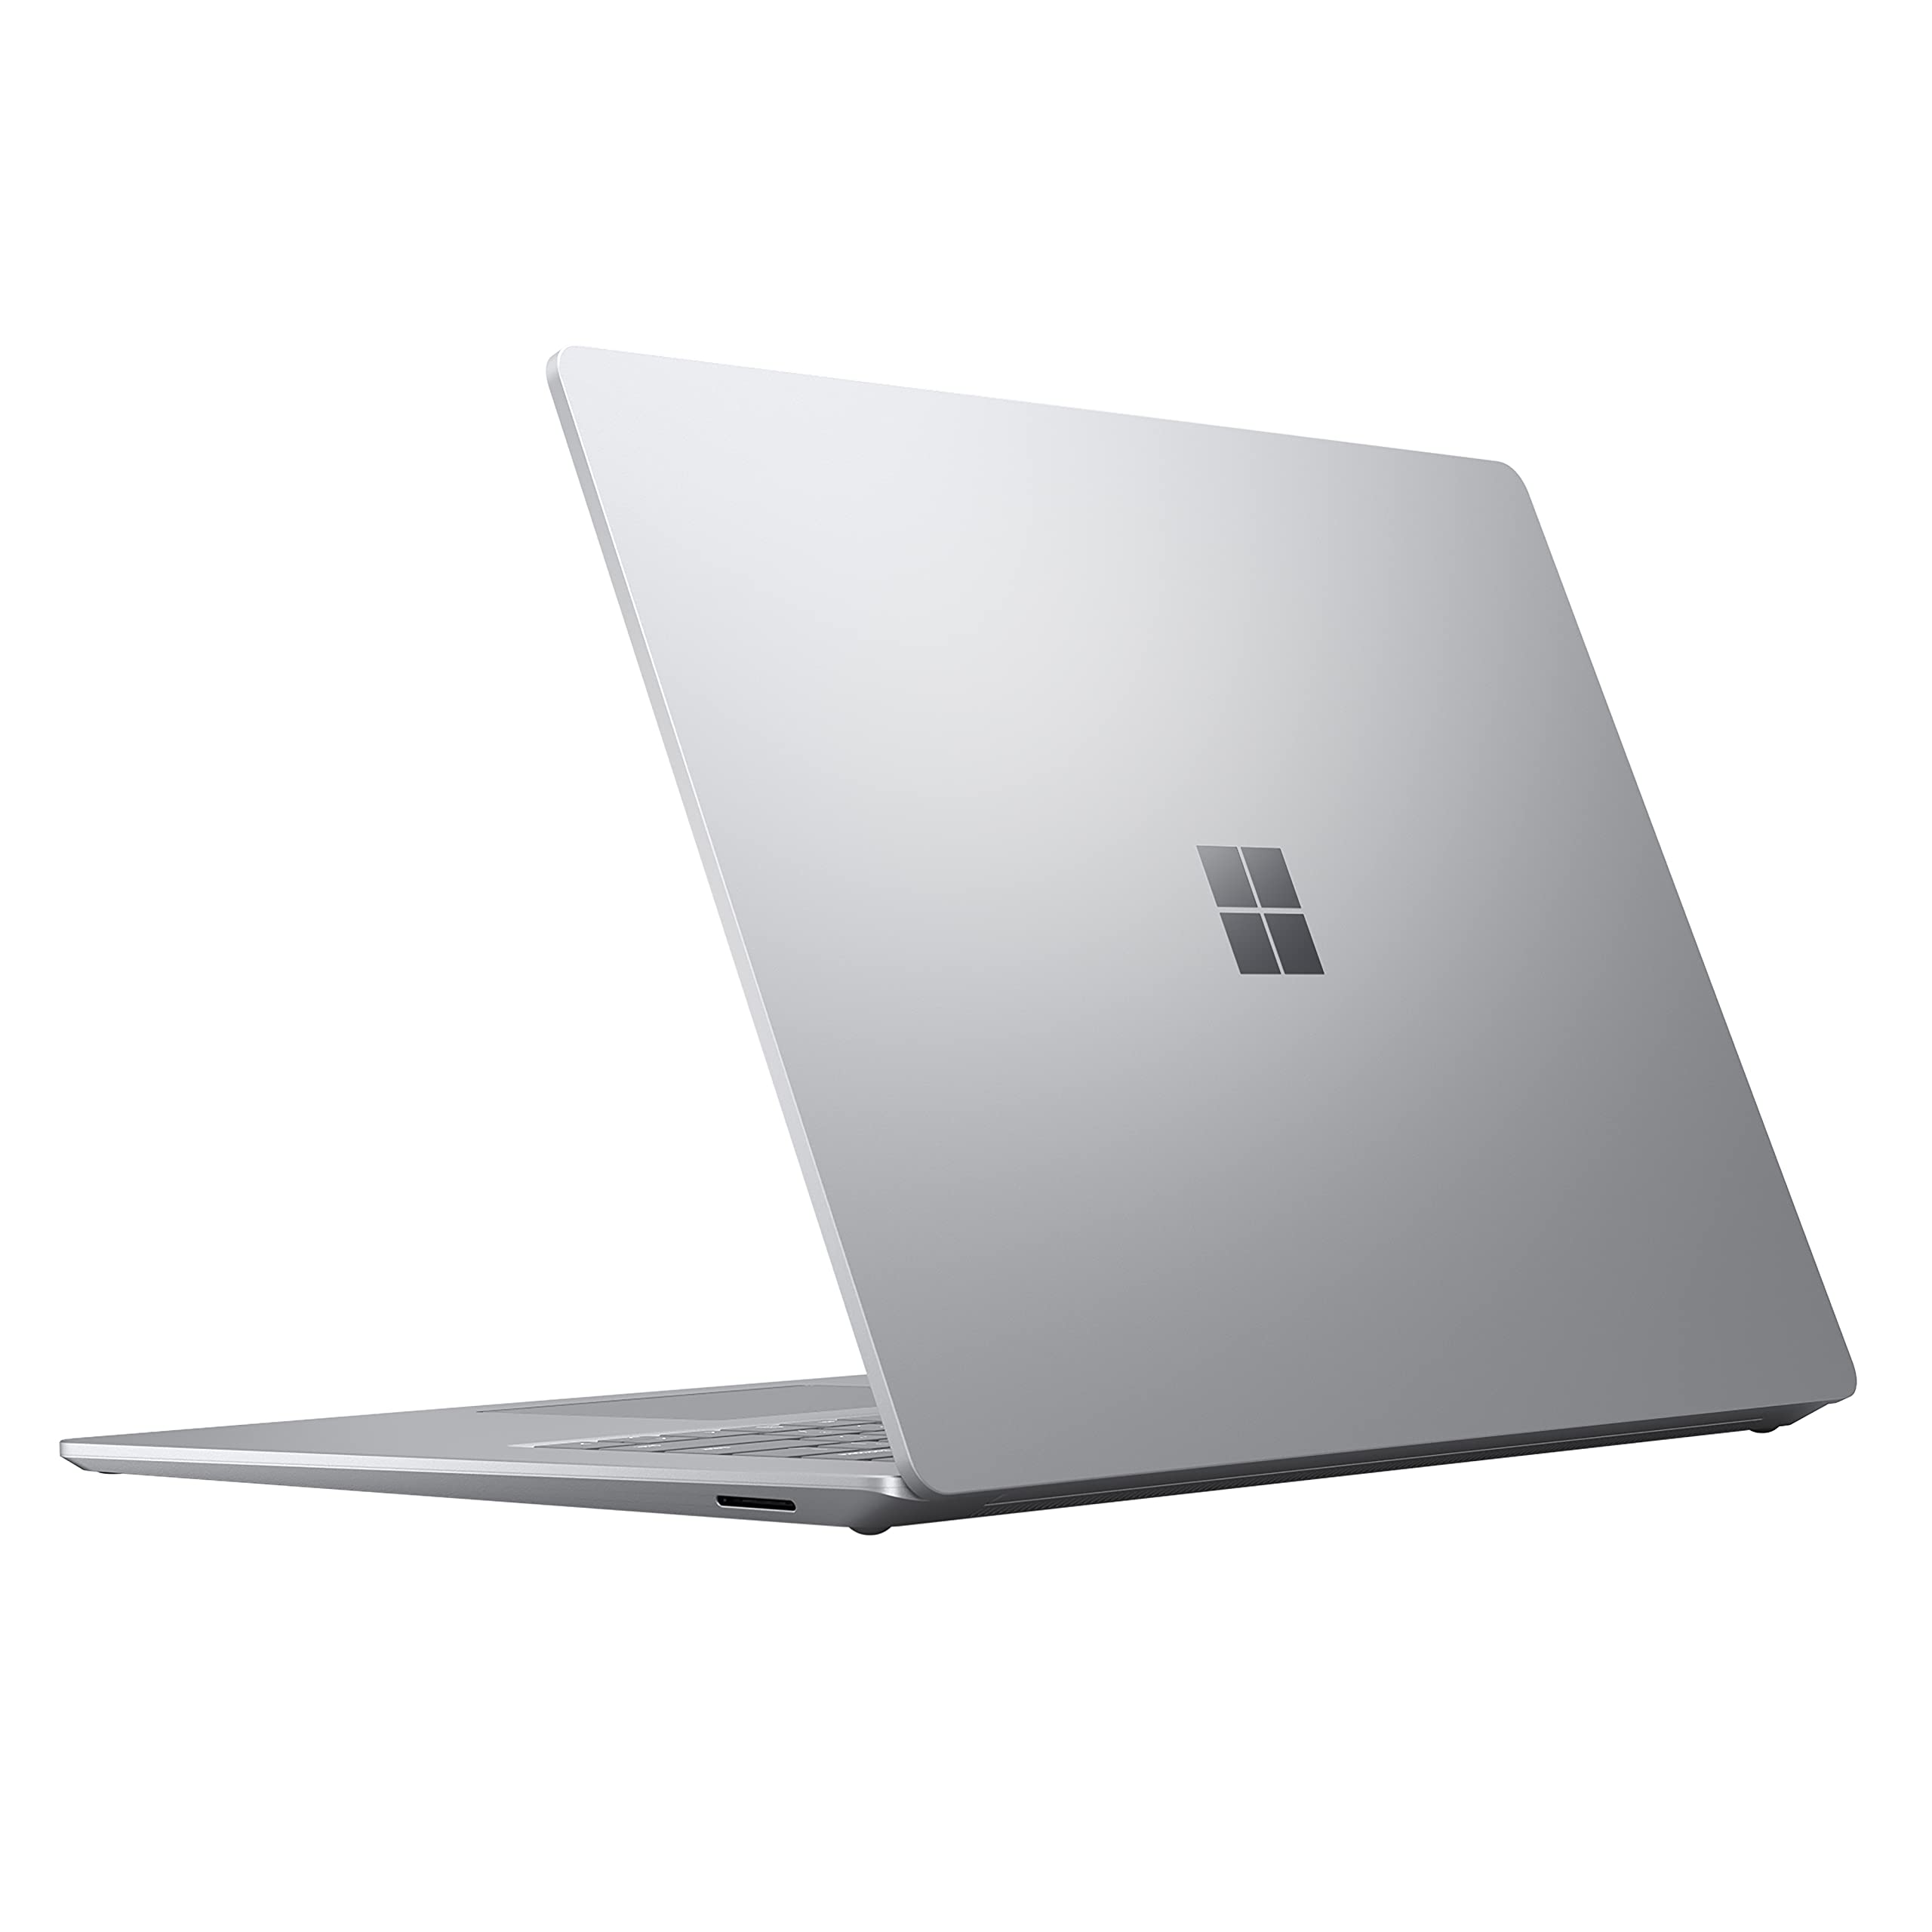 Microsoft Surface Laptop 4 13.5” Touch-Screen – AMD Ryzen 5 Surface Edition - 16GB Memory - 256GB Solid State Drive - Platinum